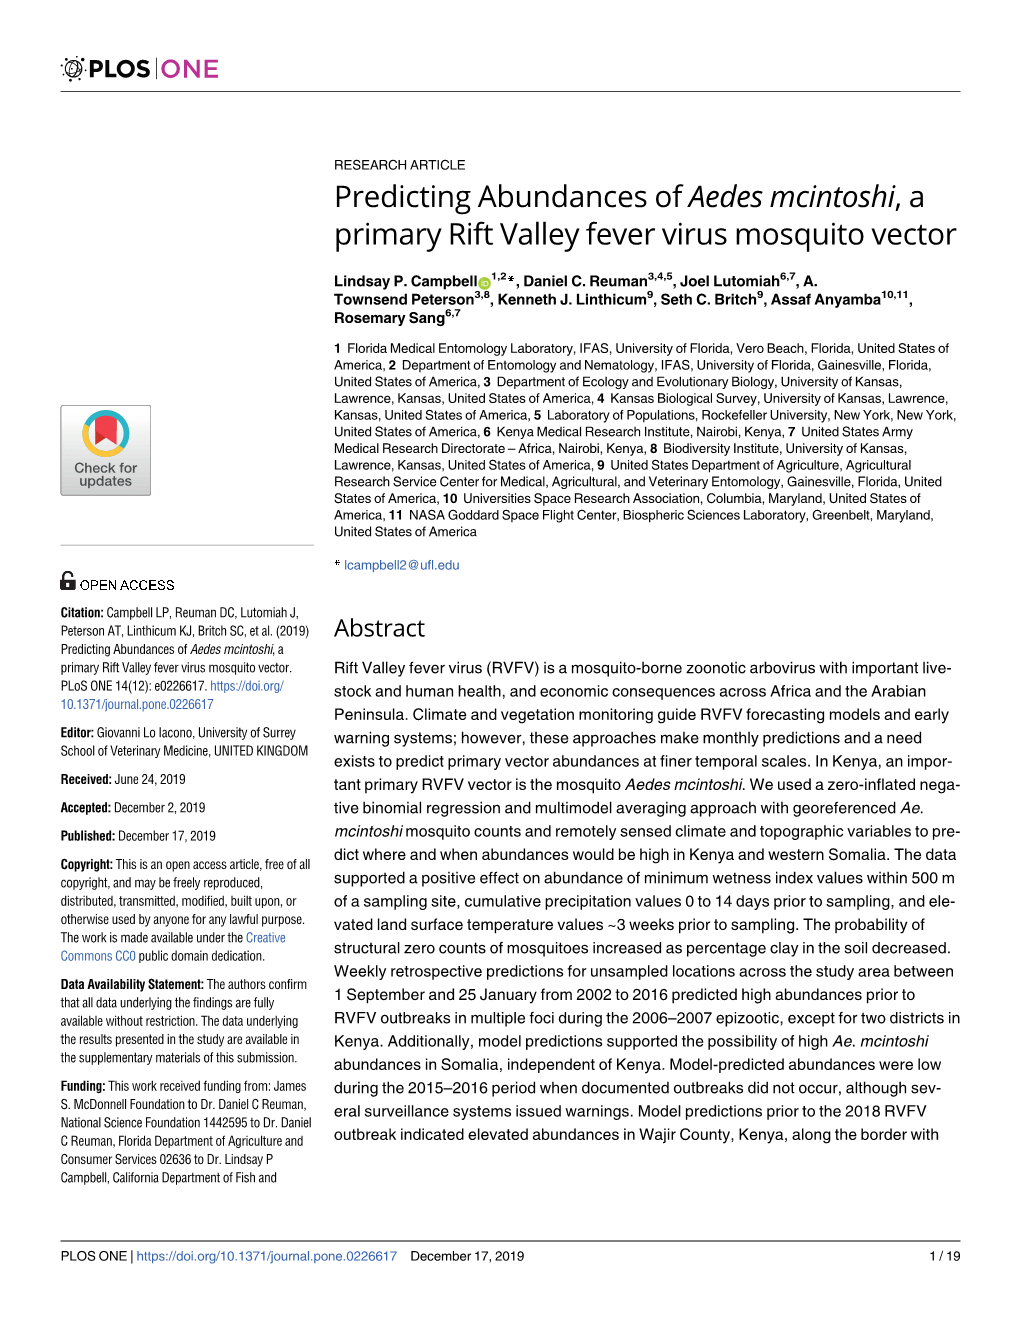 Predicting Abundances of Aedes Mcintoshi, a Primary Rift Valley Fever Virus Mosquito Vector